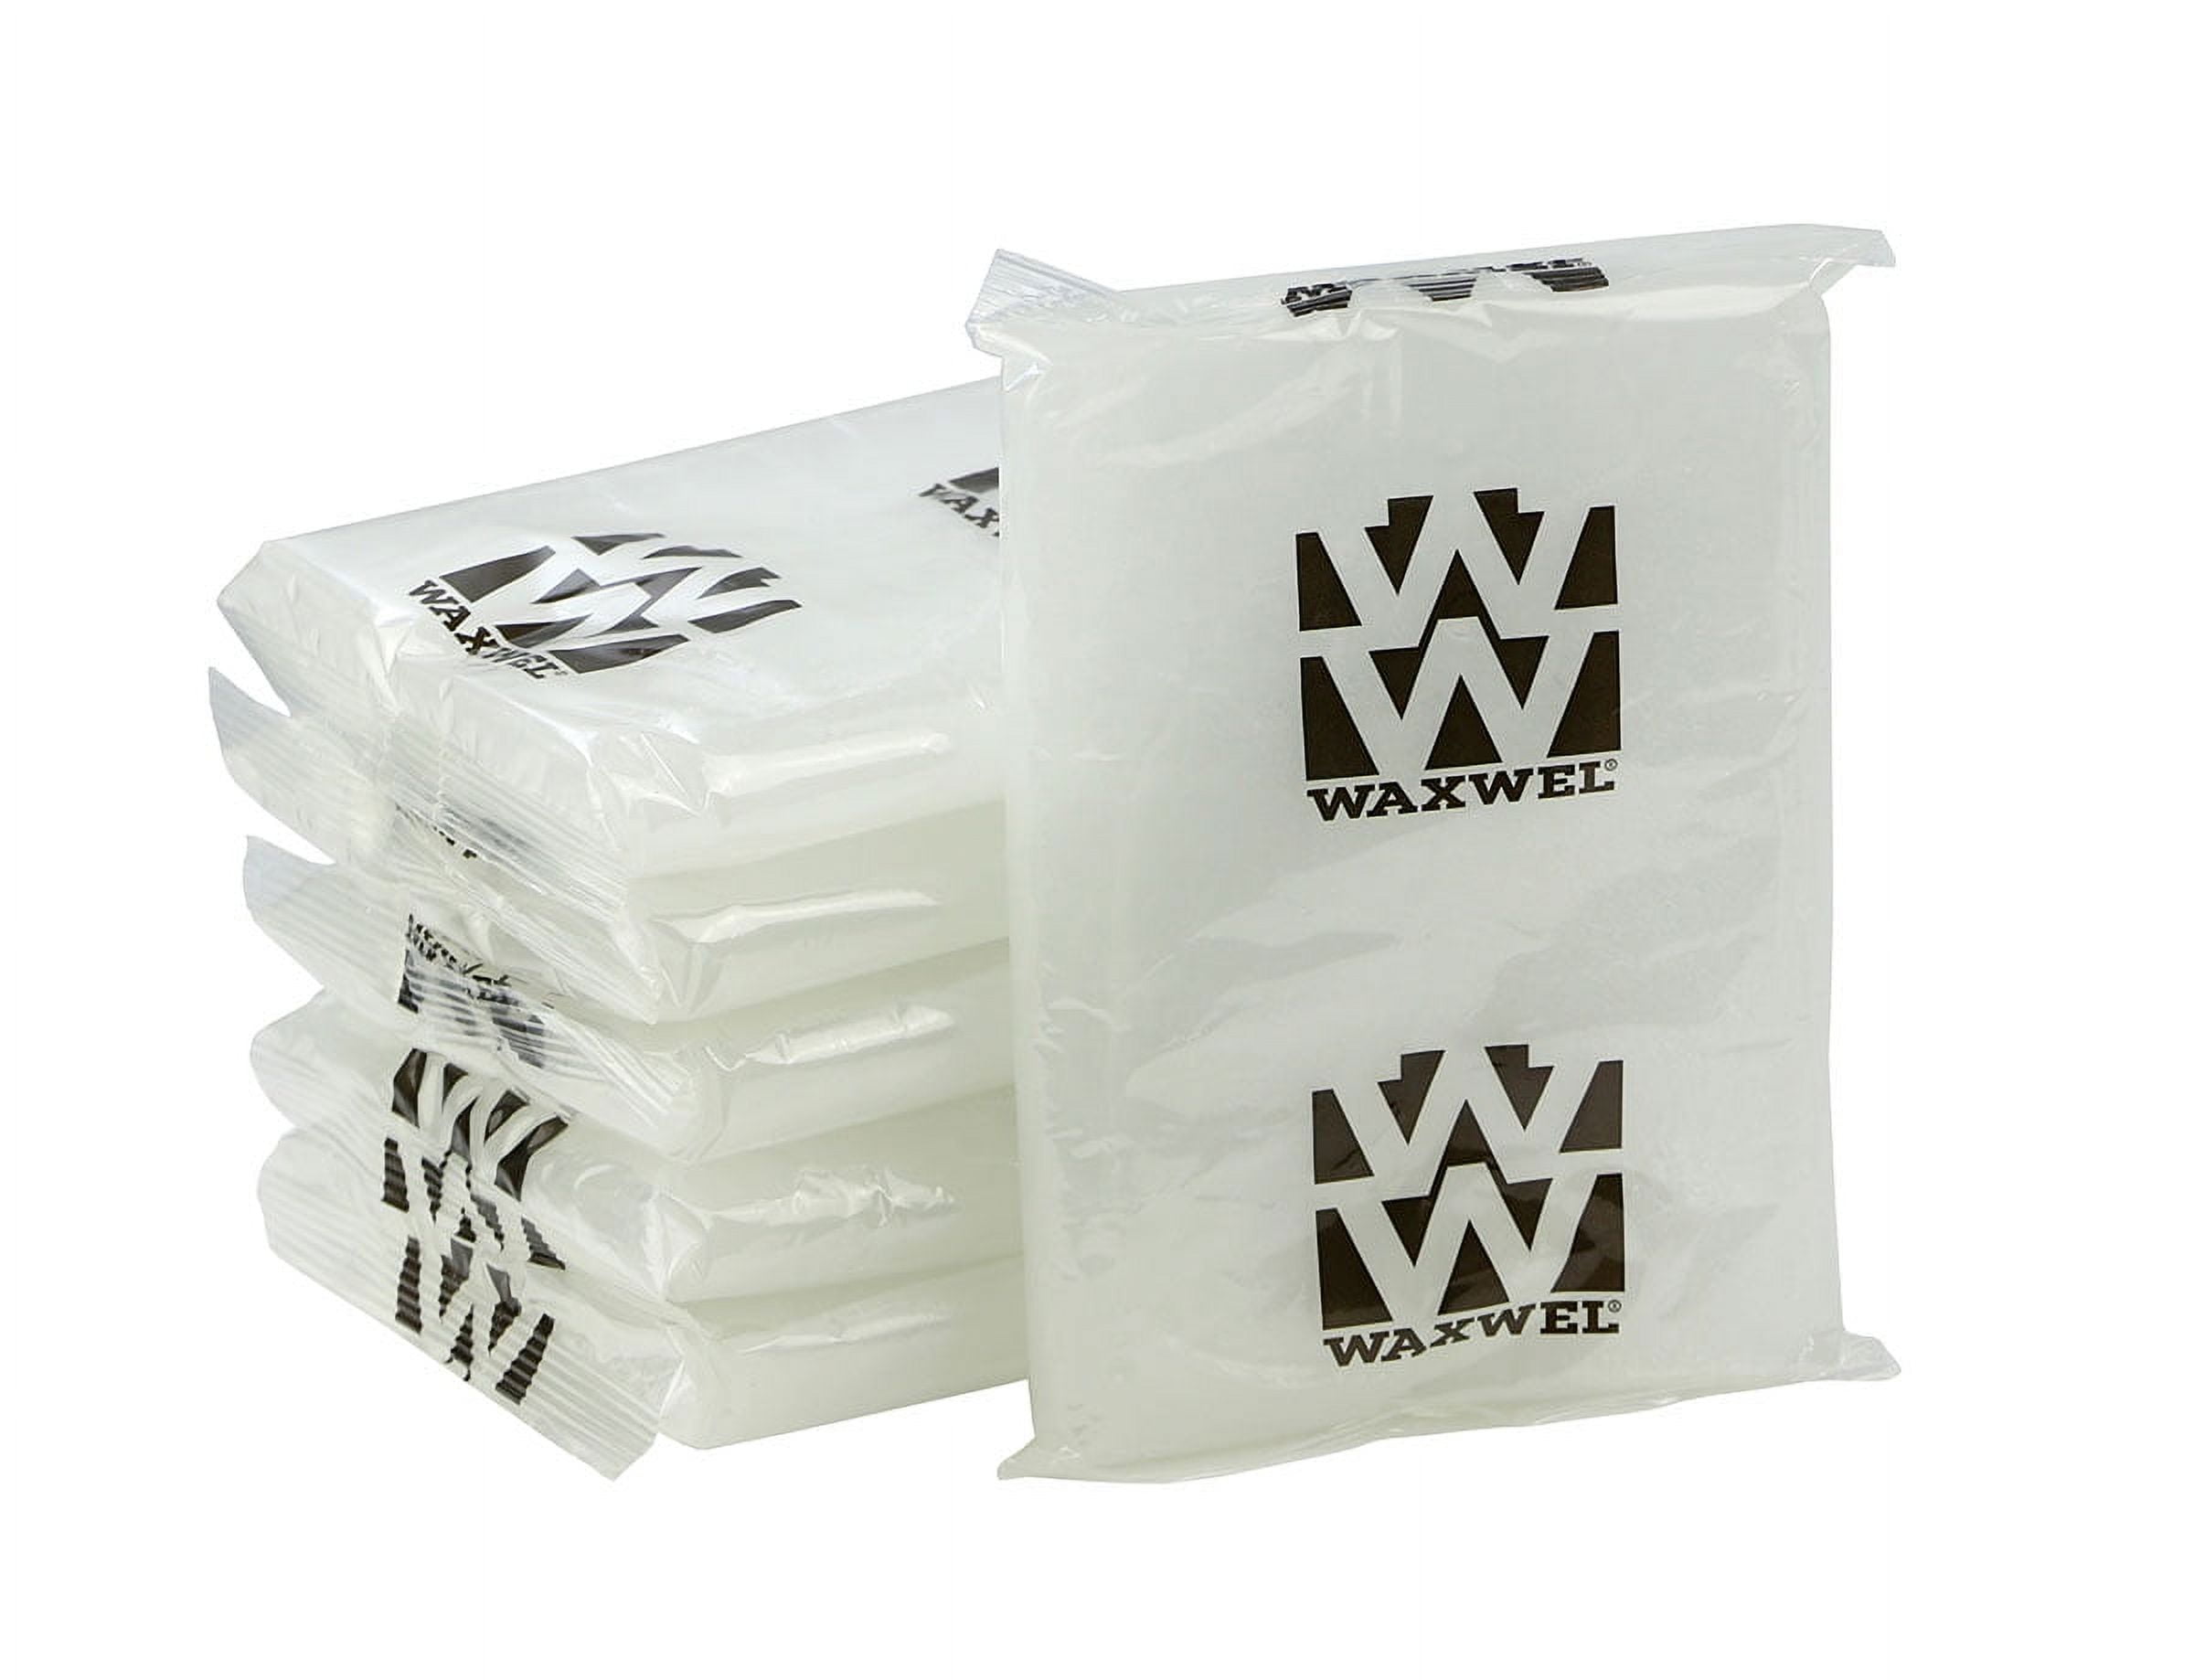 WaxWel Paraffin Wax Bath Accessory Package, Professional Home and